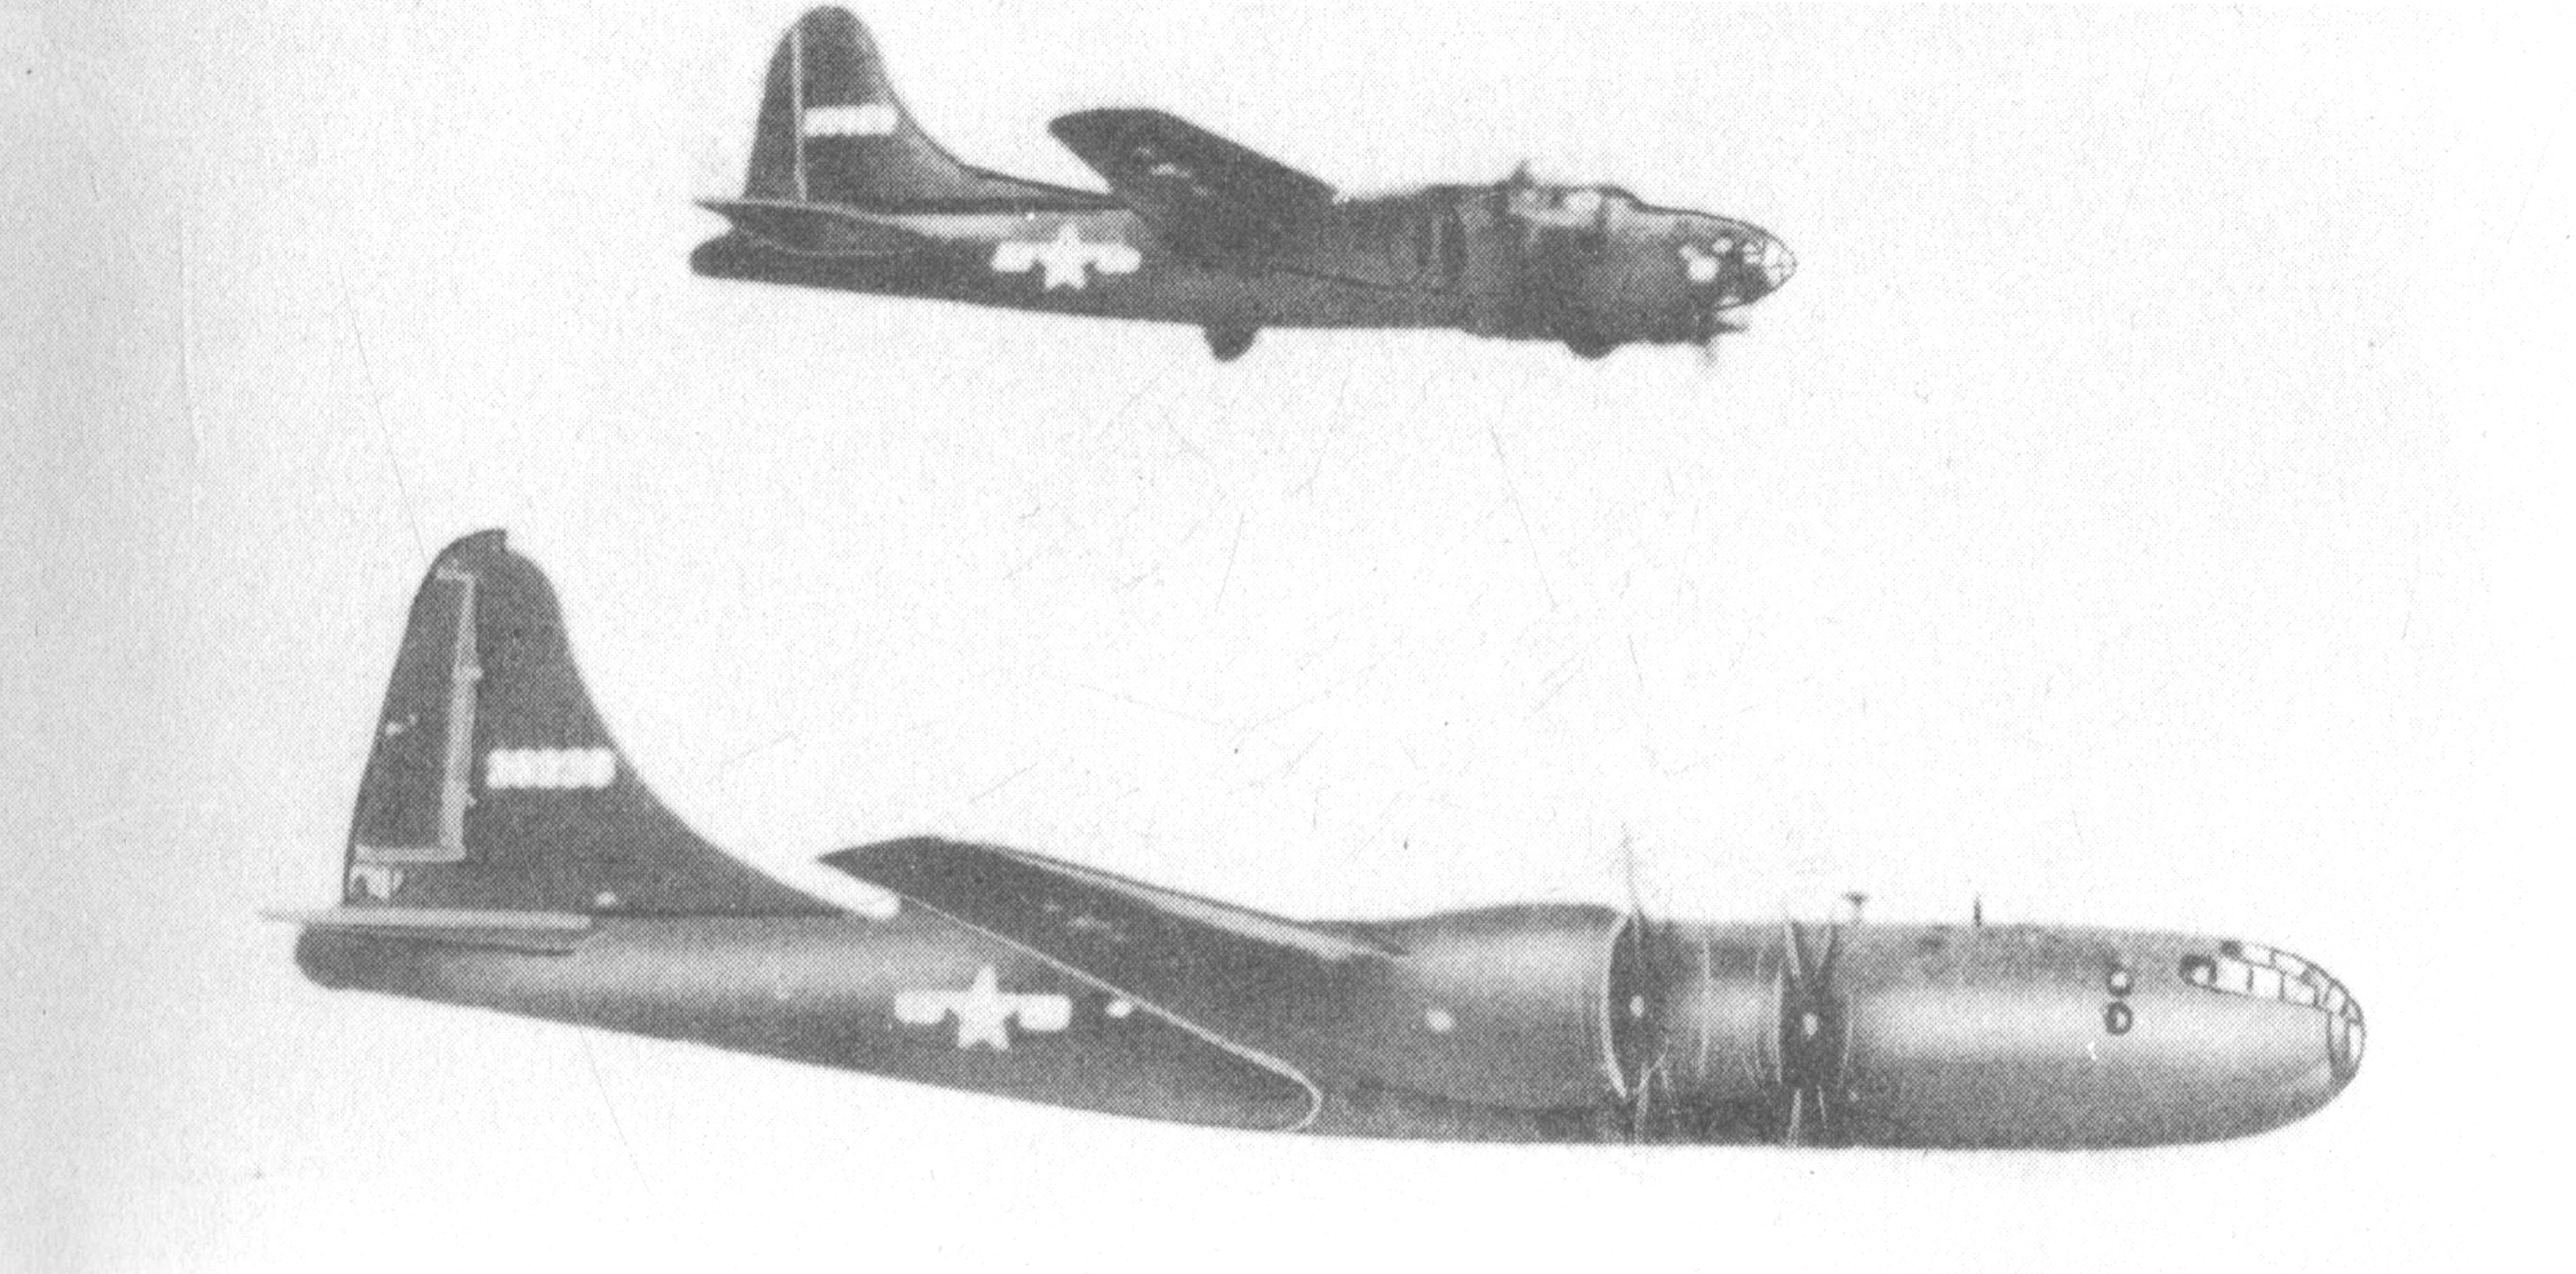 A B-17 Flying Fortress and a B-29 Superfortress flying in formation.